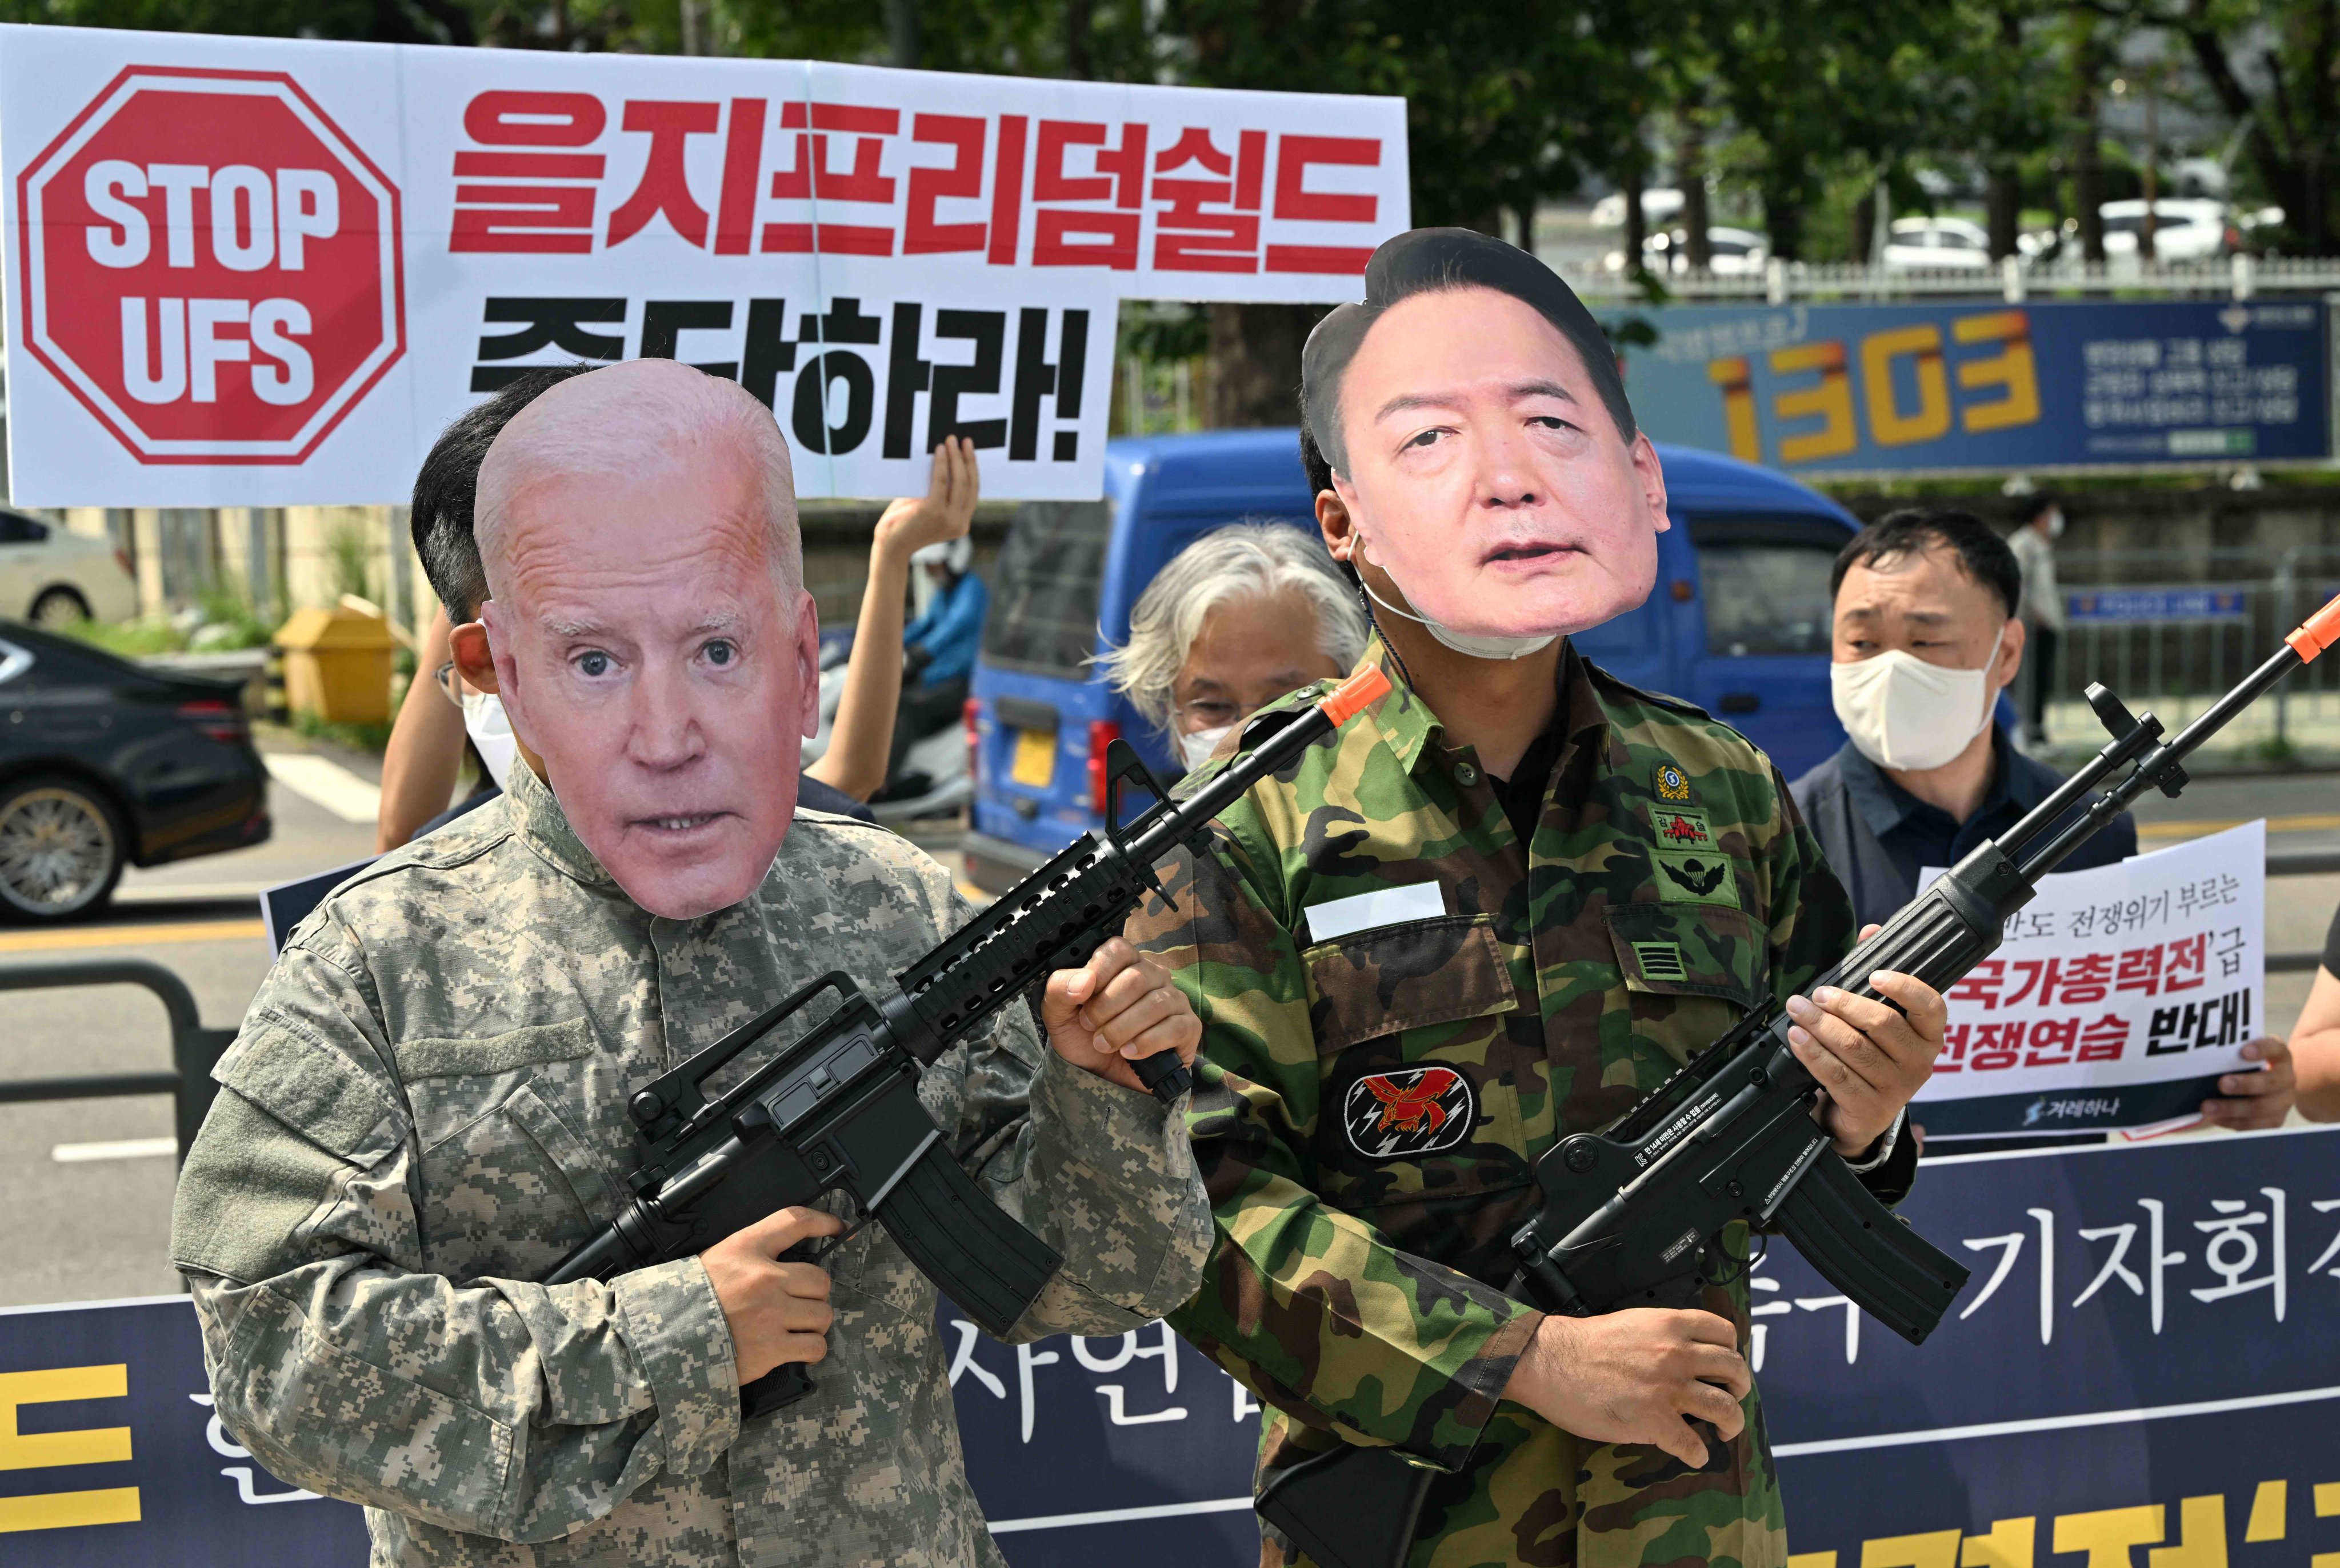 Anti-war activists wearing Joe Biden and Yoon Suk-yeol masks protest against US-South Korea military drills, near the presidential office in Seoul on August 4. Photo: AFP 